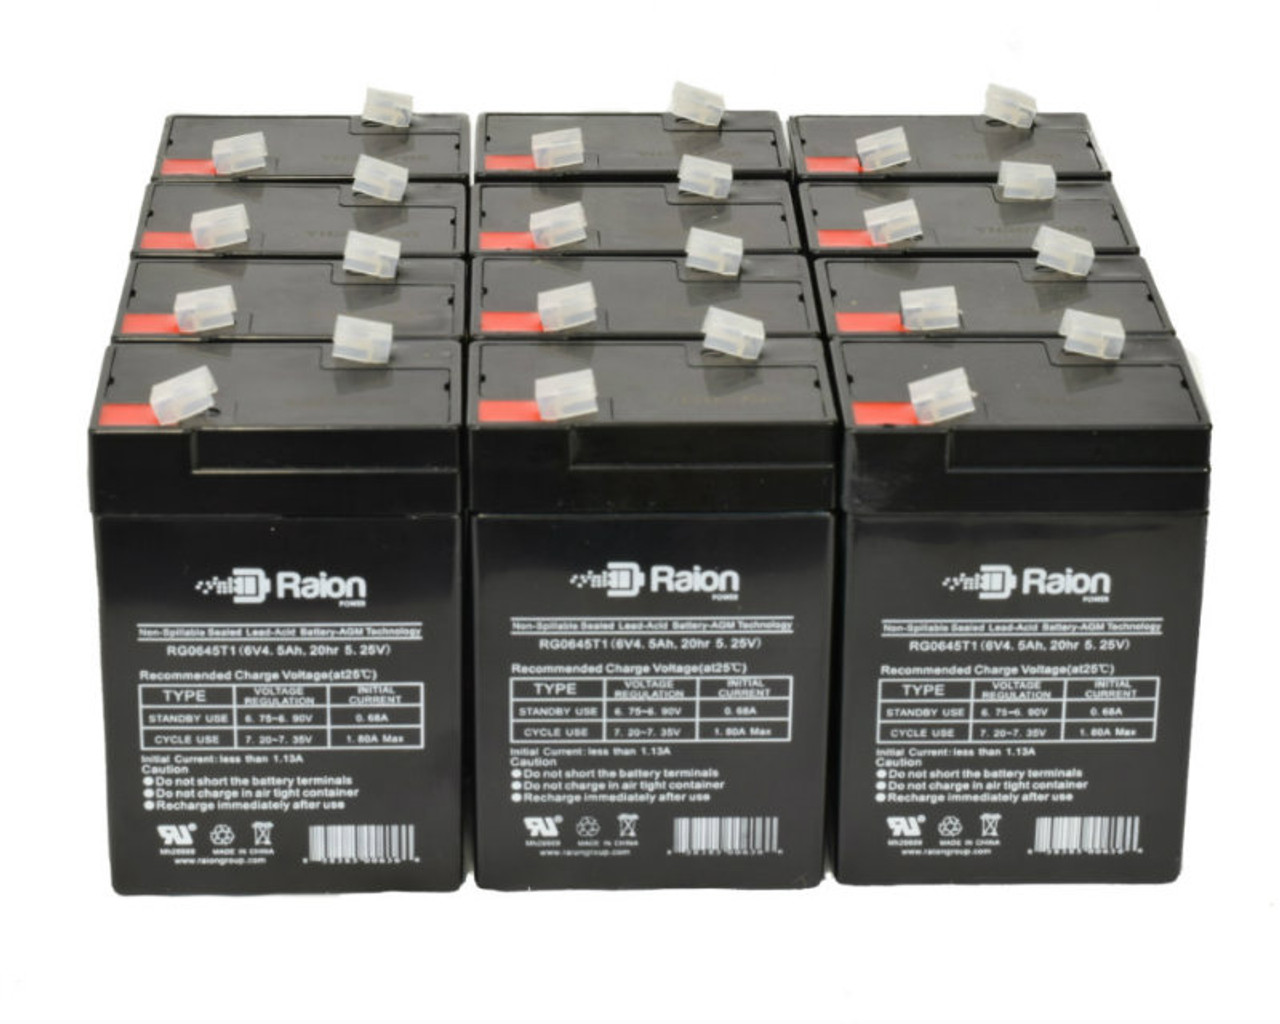 Raion Power 6V 4.5Ah Replacement Emergency Light Battery for Trio Lighting TL930007 - 12 Pack